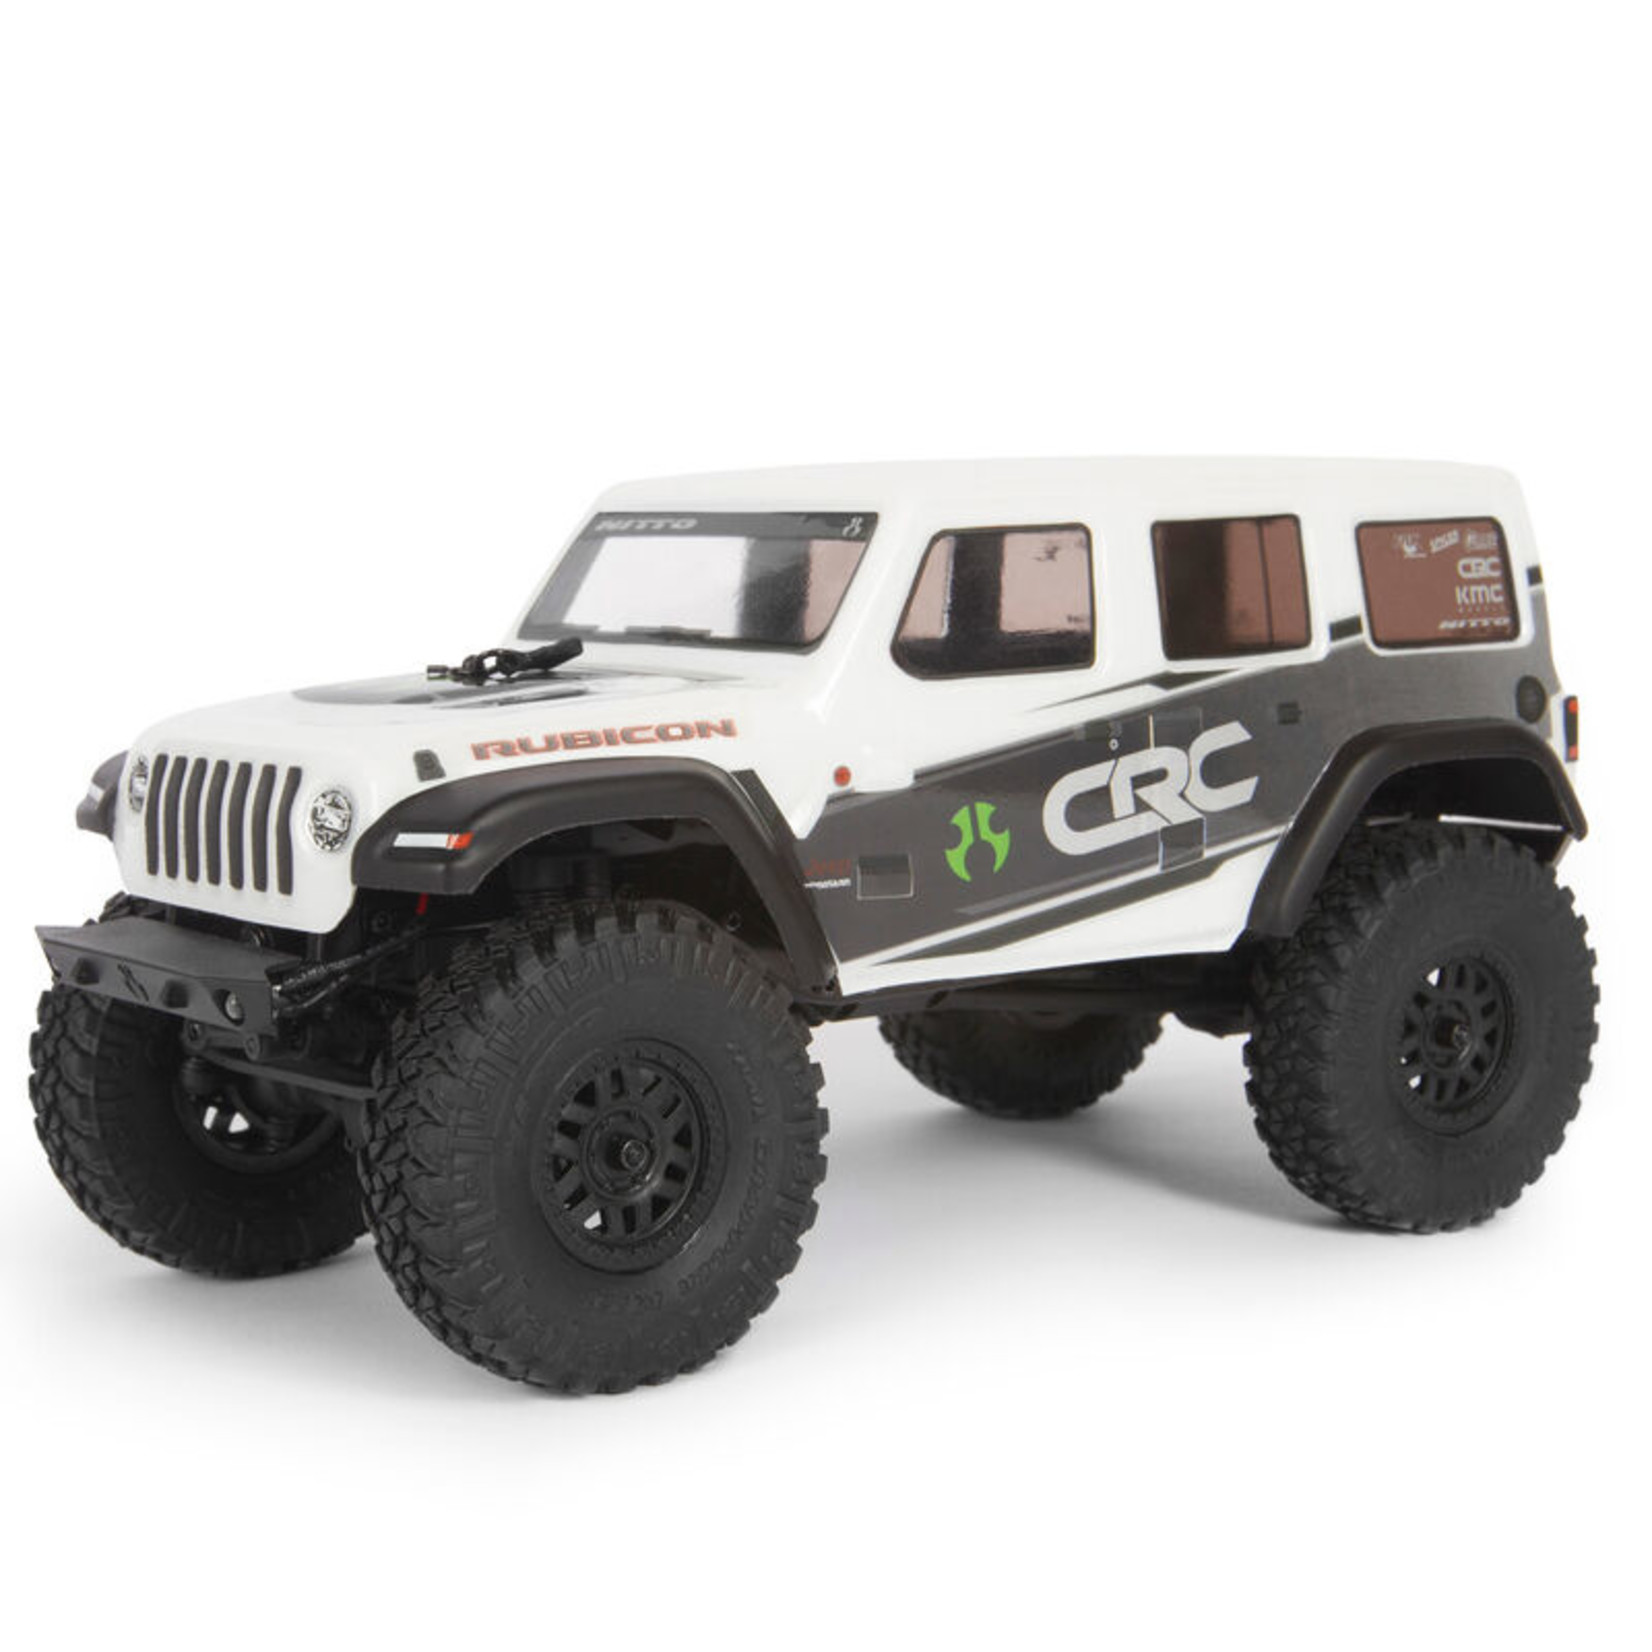 Axial Racing AXI00002T1  1/24 SCX24 2019 Jeep Wrangler JLU CRC 4WD Rock Crawler Brushed RTR, White